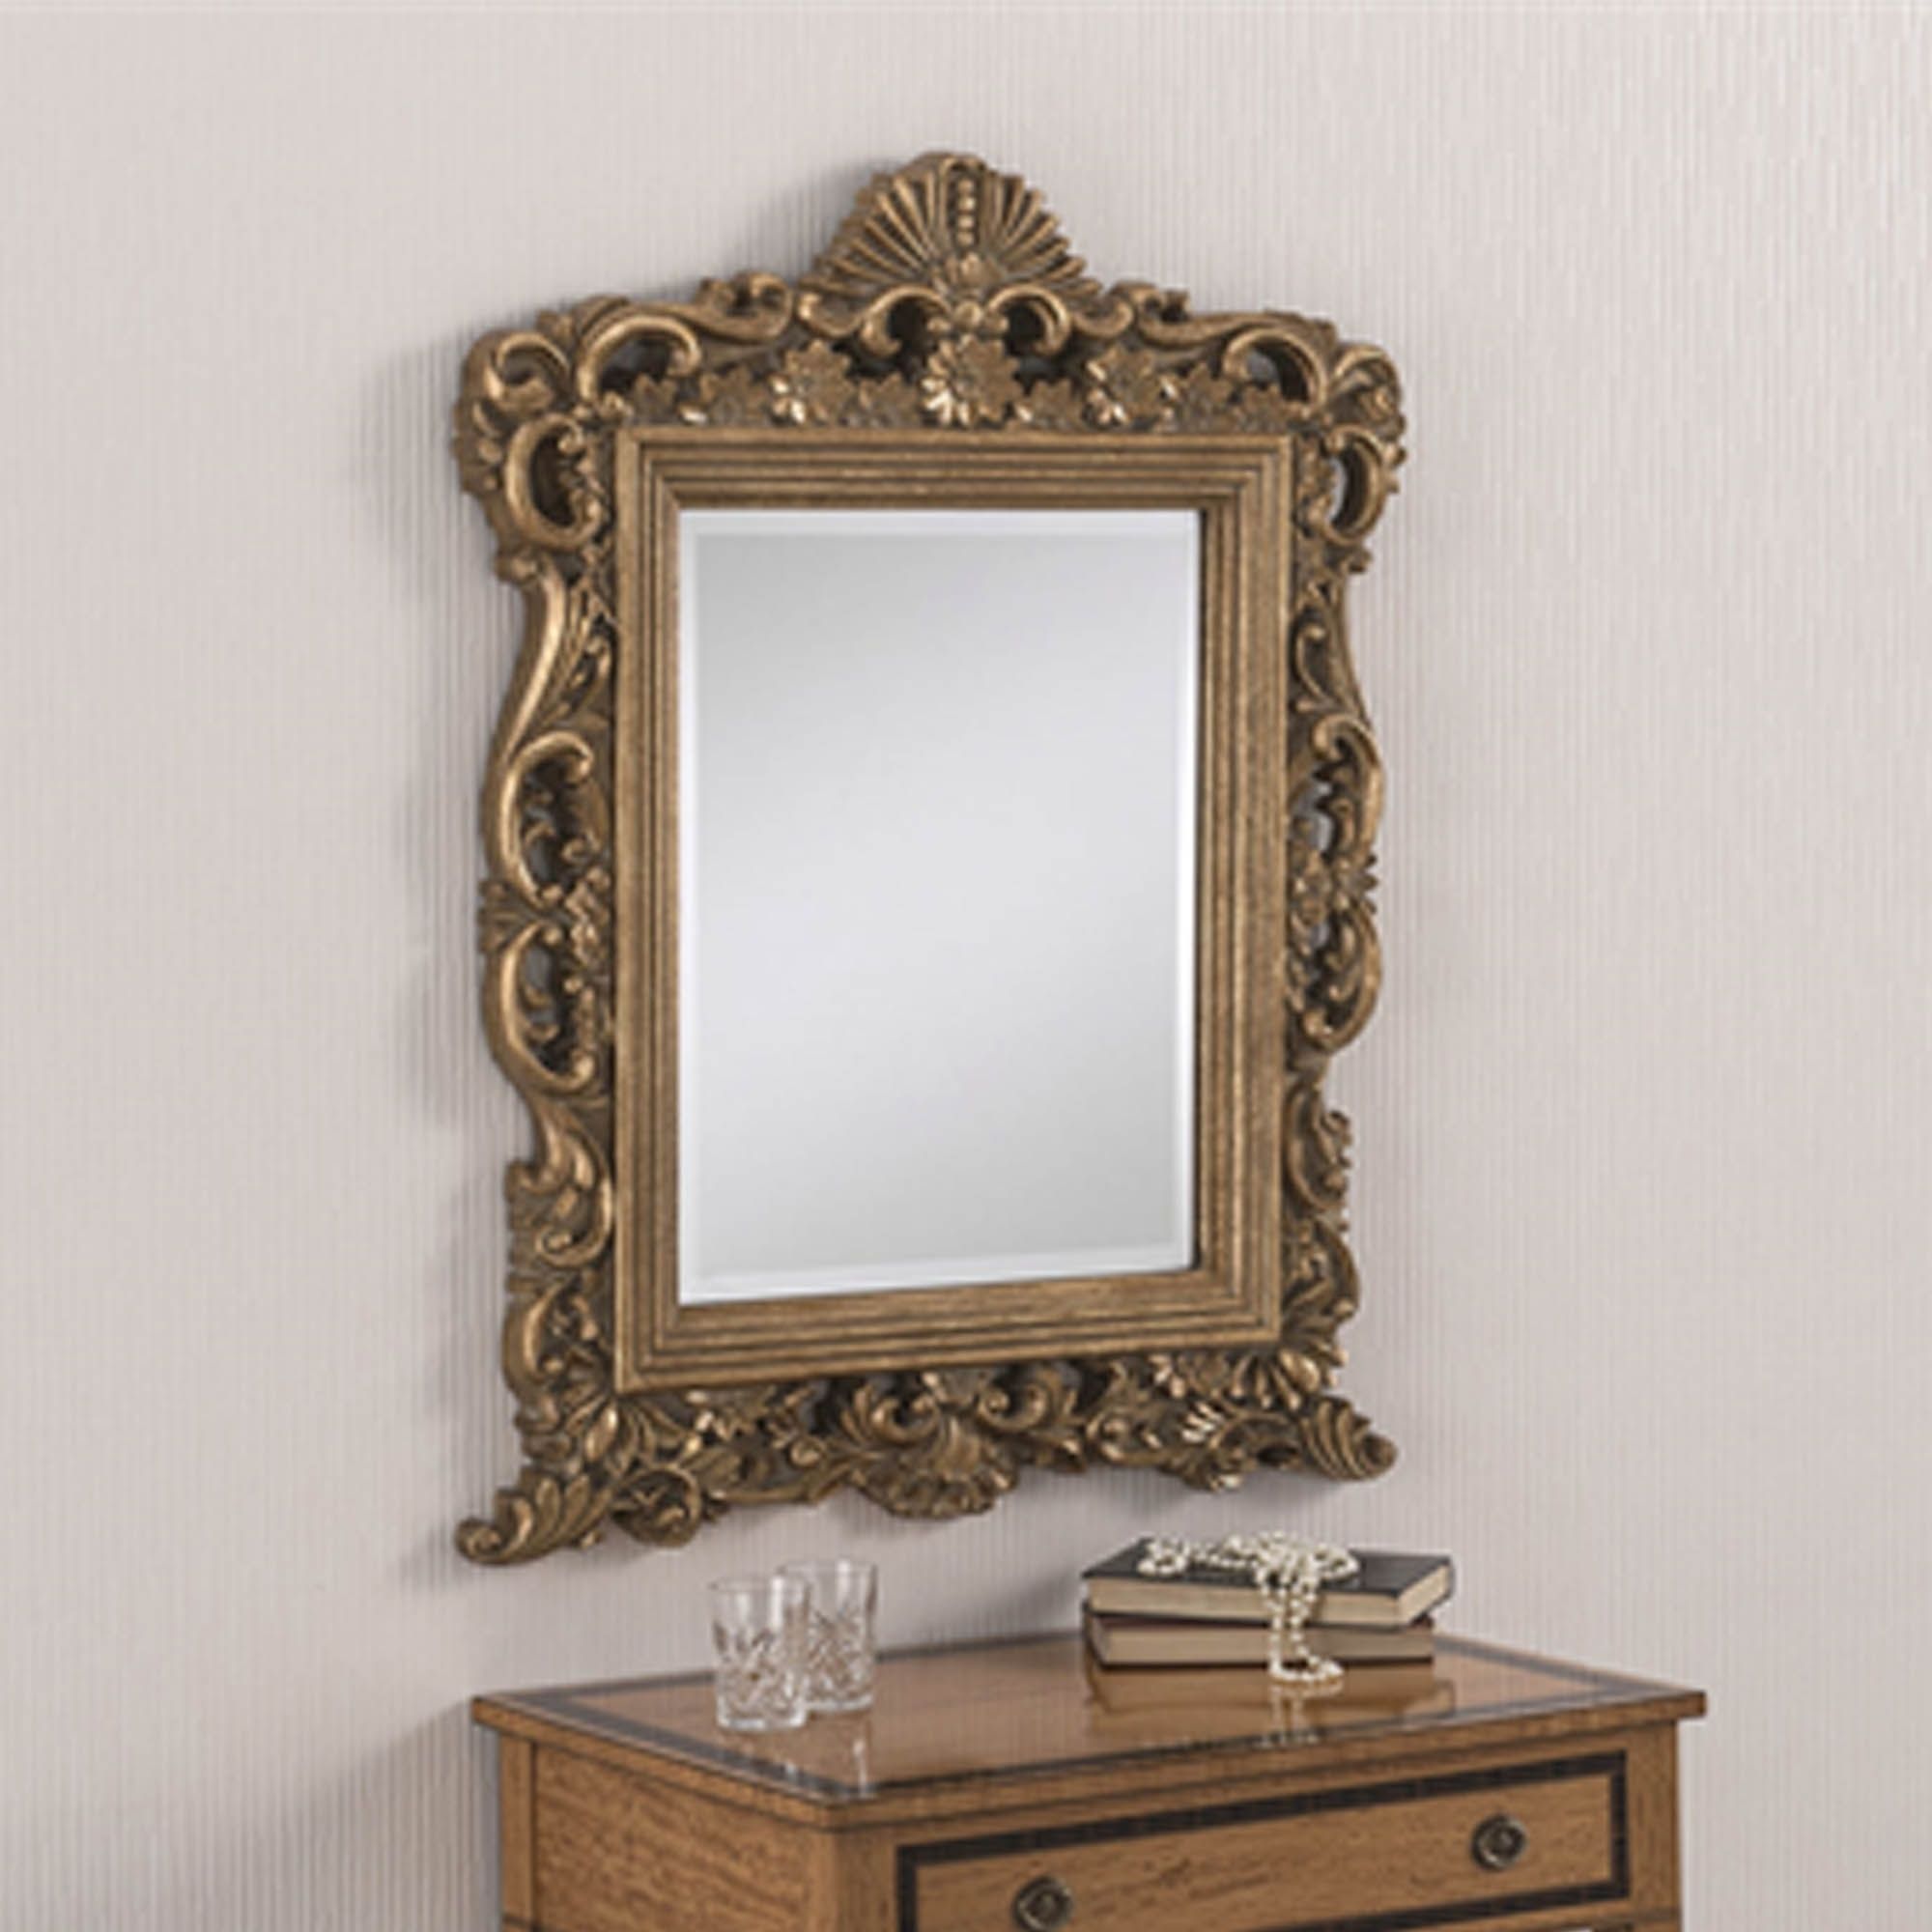 Decorative Antique French Style Gold Ornate Wall Mirror | Hd365 In Antique Gold Scallop Wall Mirrors (View 3 of 15)